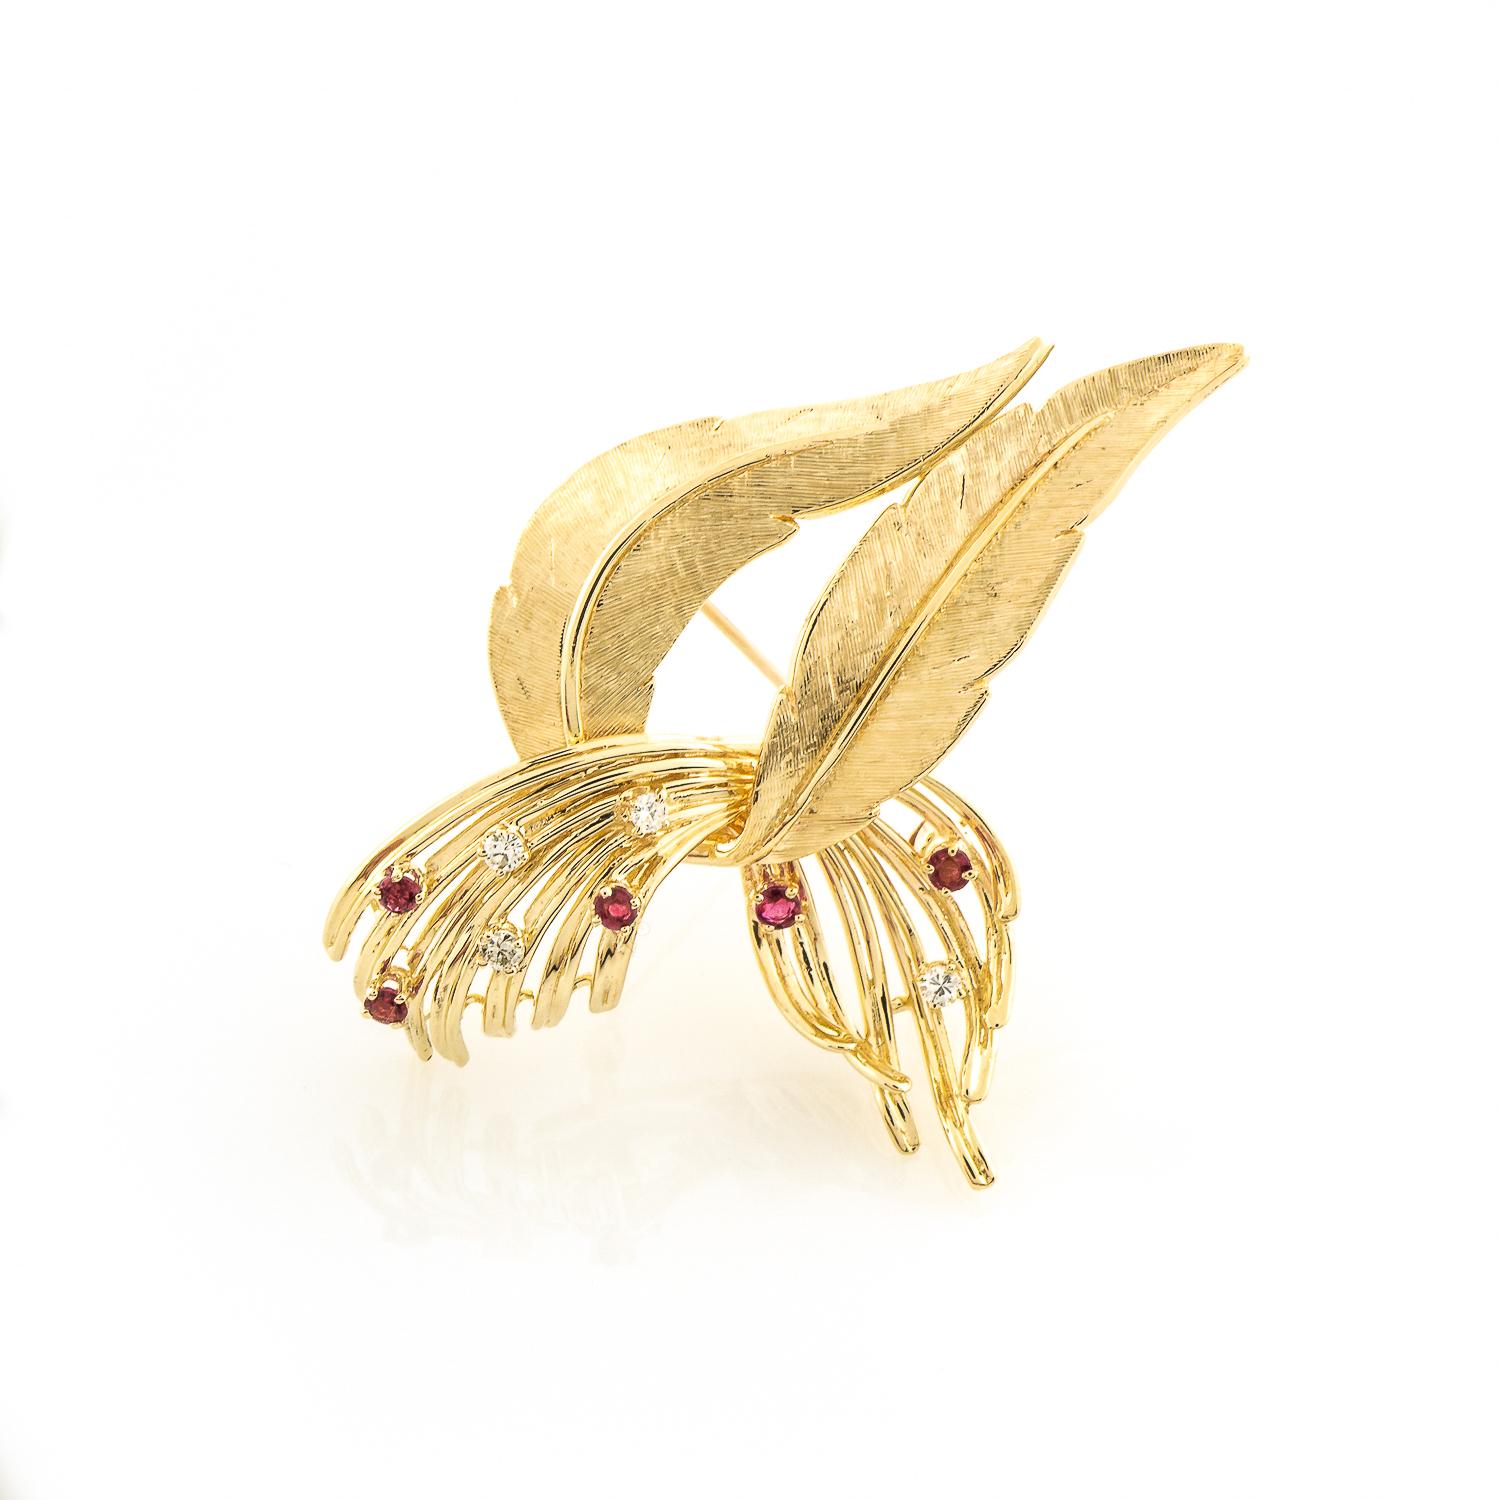 This elegant pin is crafted with a textured 14K yellow gold. The curved leaf silhouette shape is set with five round rubies weighing 0.20 carats and four round diamonds weighing 0.12 carats (G Color and S12 Clarity). 